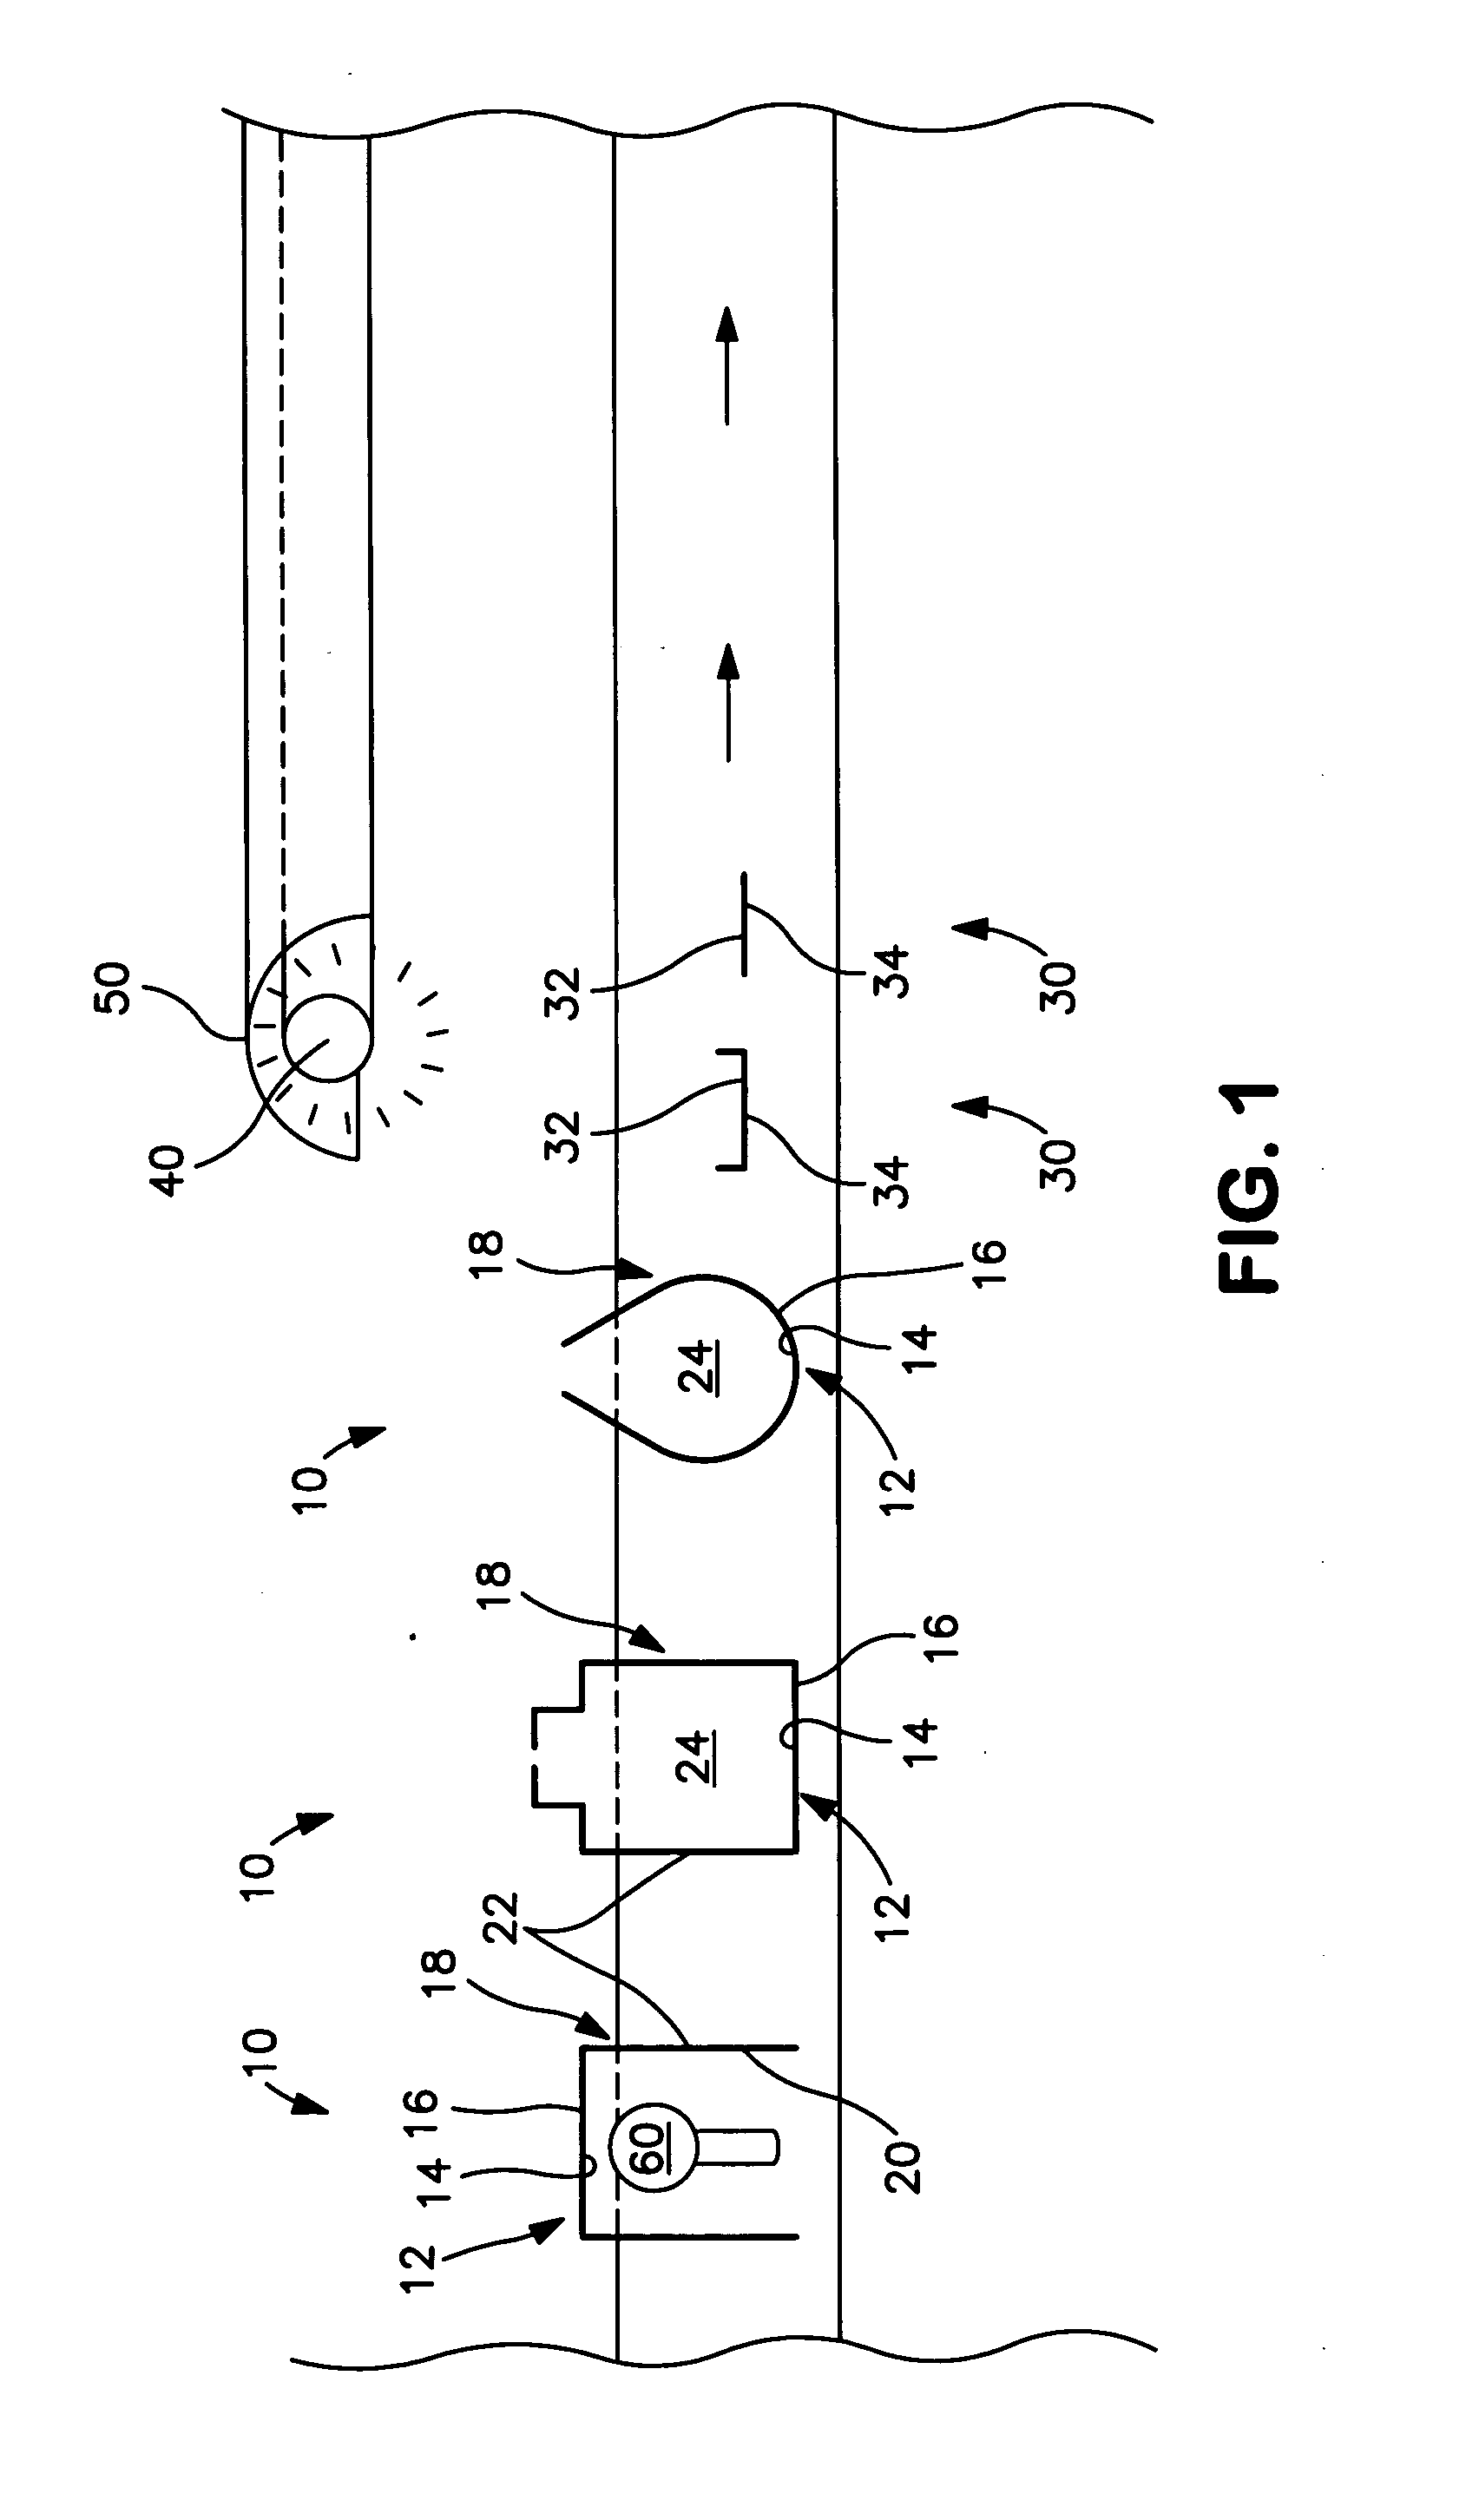 Method for sanitizing/sterilizing a container/enclosure via controlled exposure to electromagnetic radiation